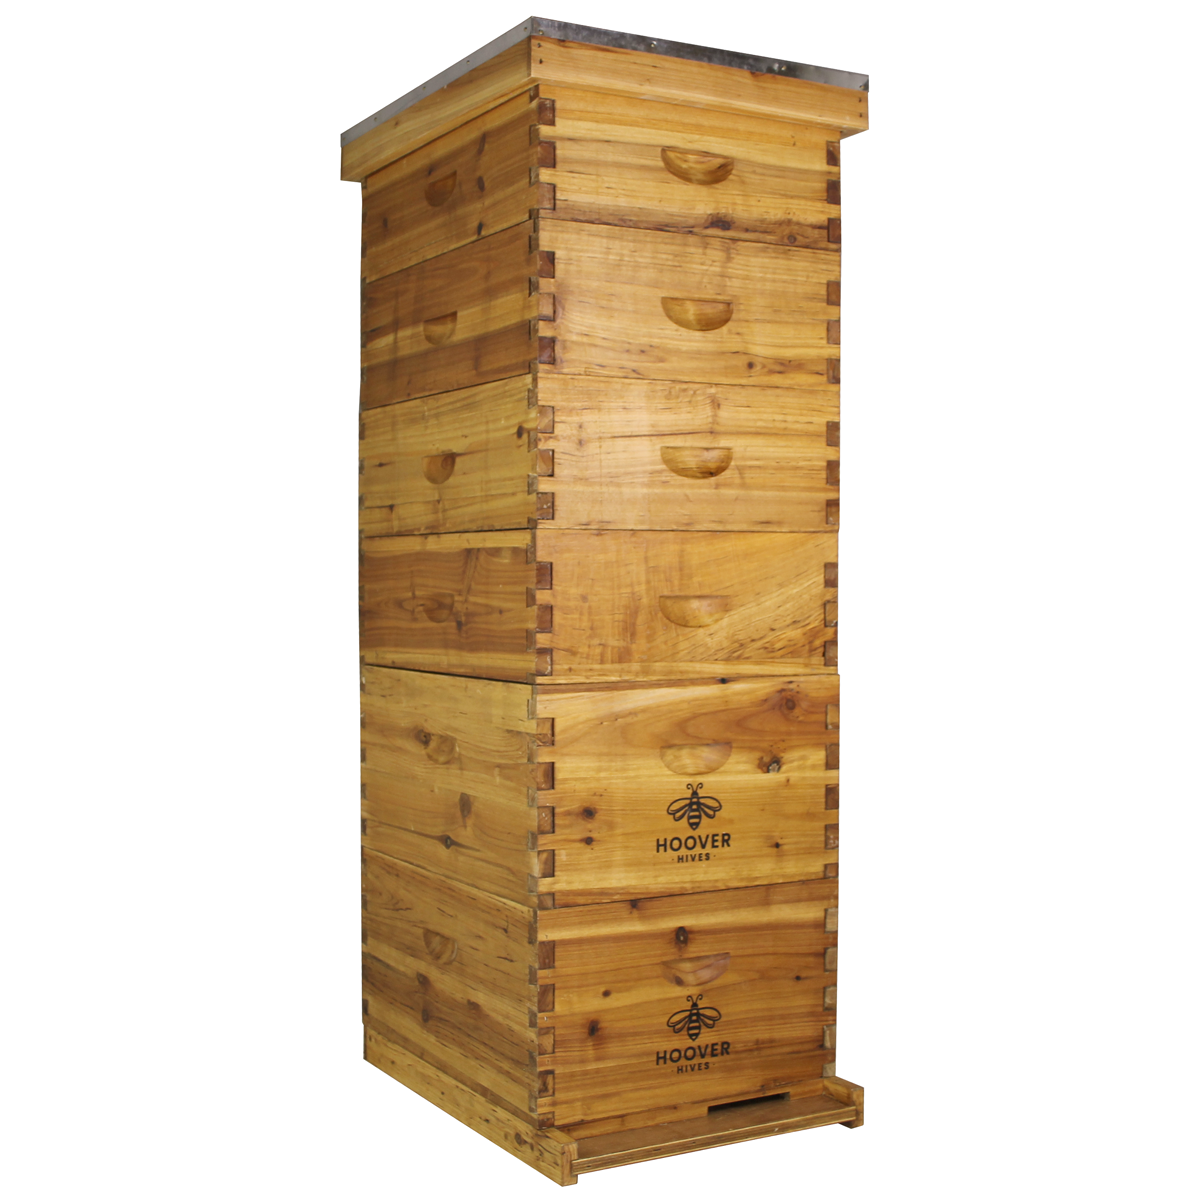 Hoover Hives Wax Coated 10 Frame Beehive With 2 Deep Bee Boxes & 4 Medium Bee Boxes